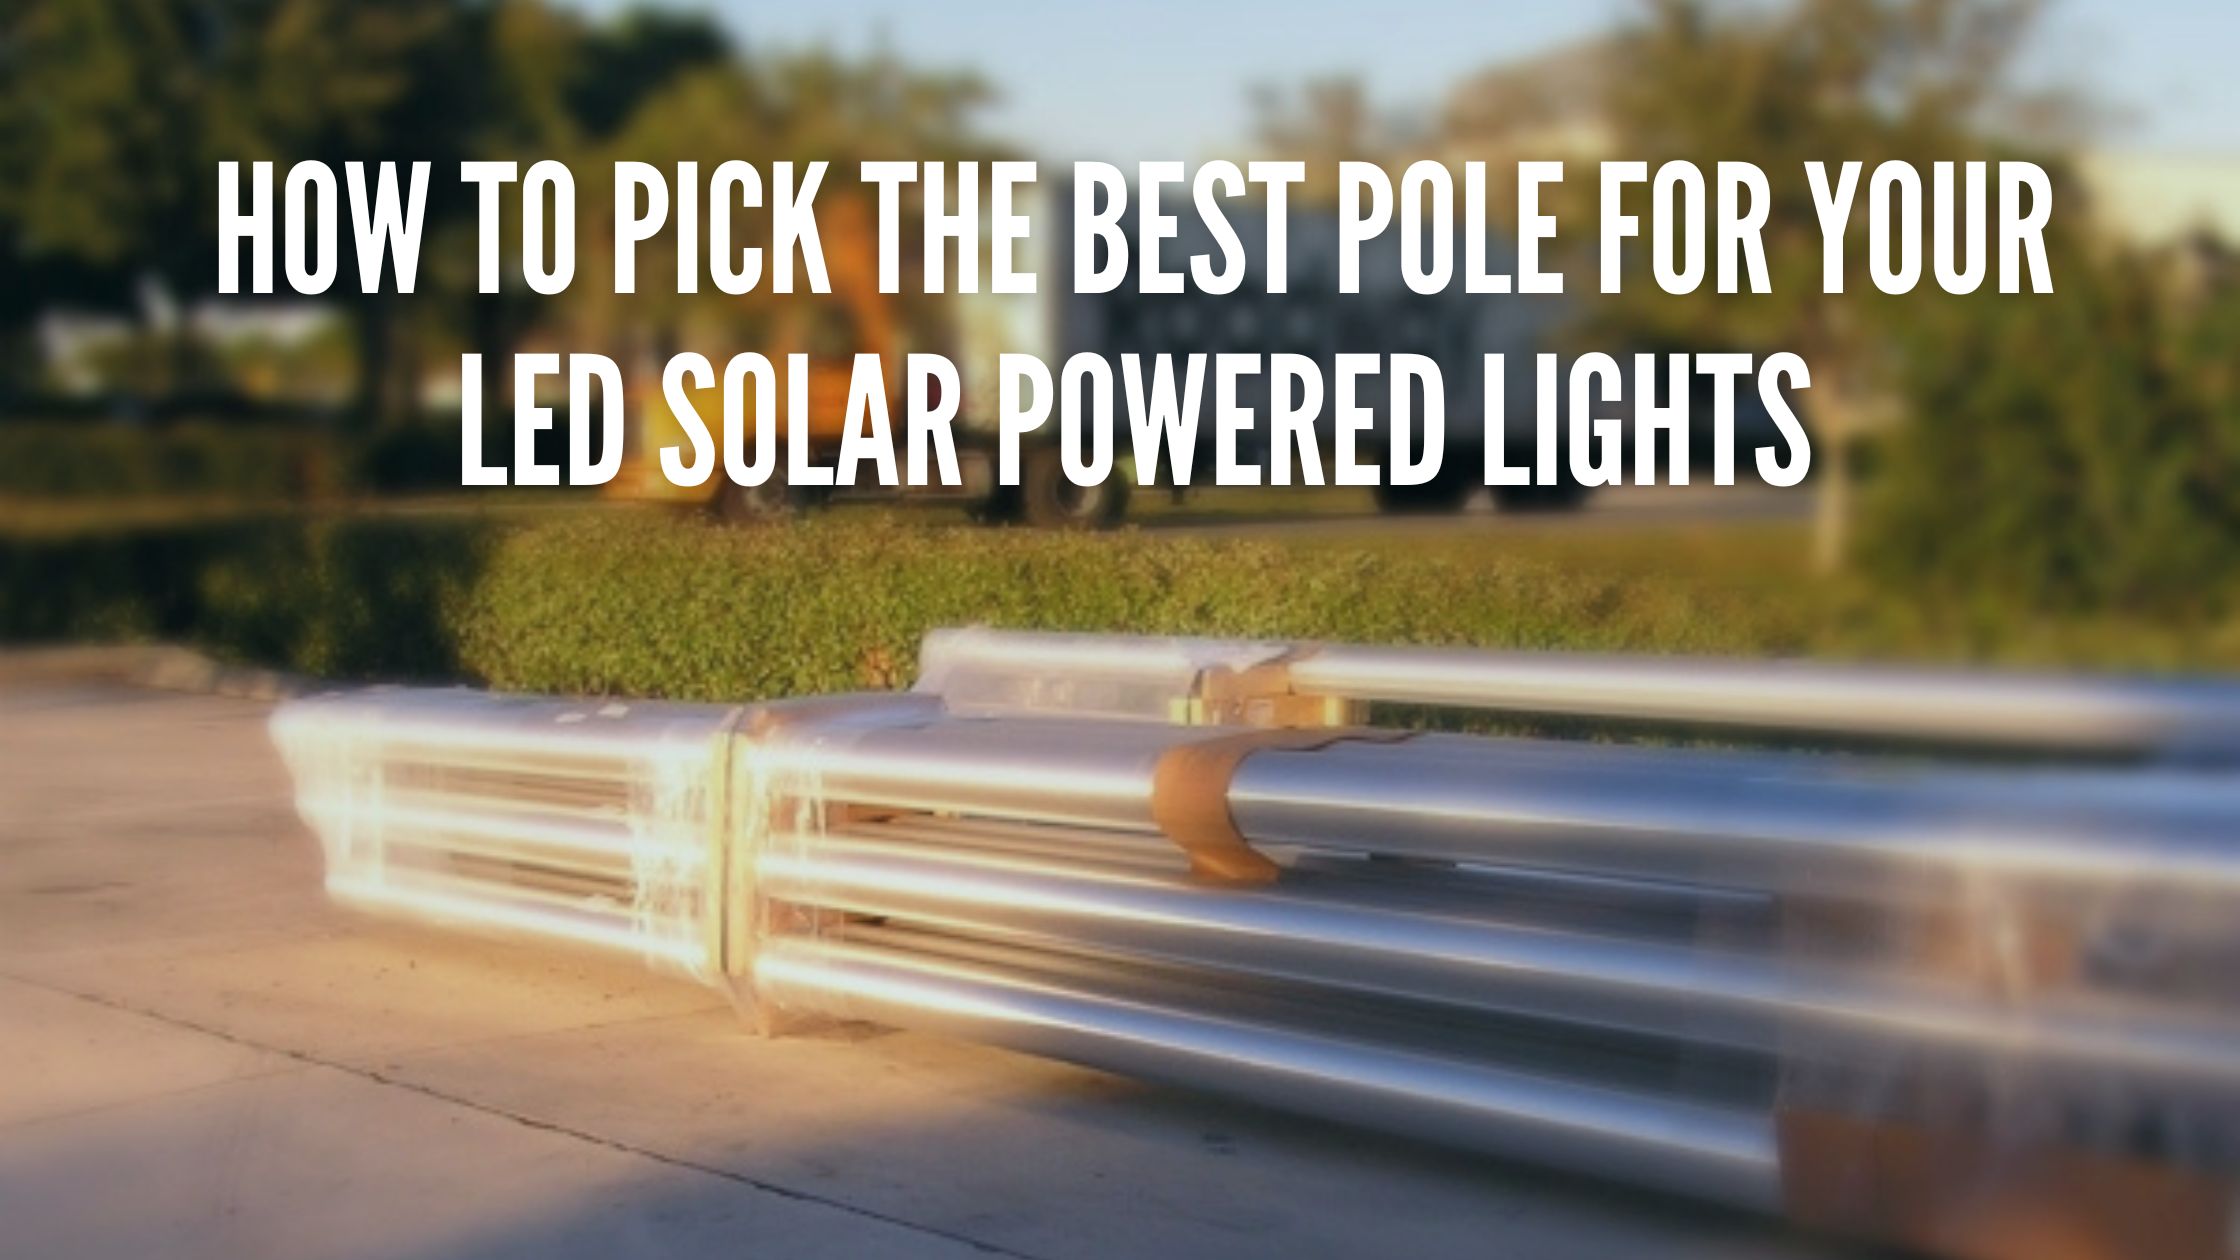 How To Pick the Best Pole for your LED Solar Powered Lights